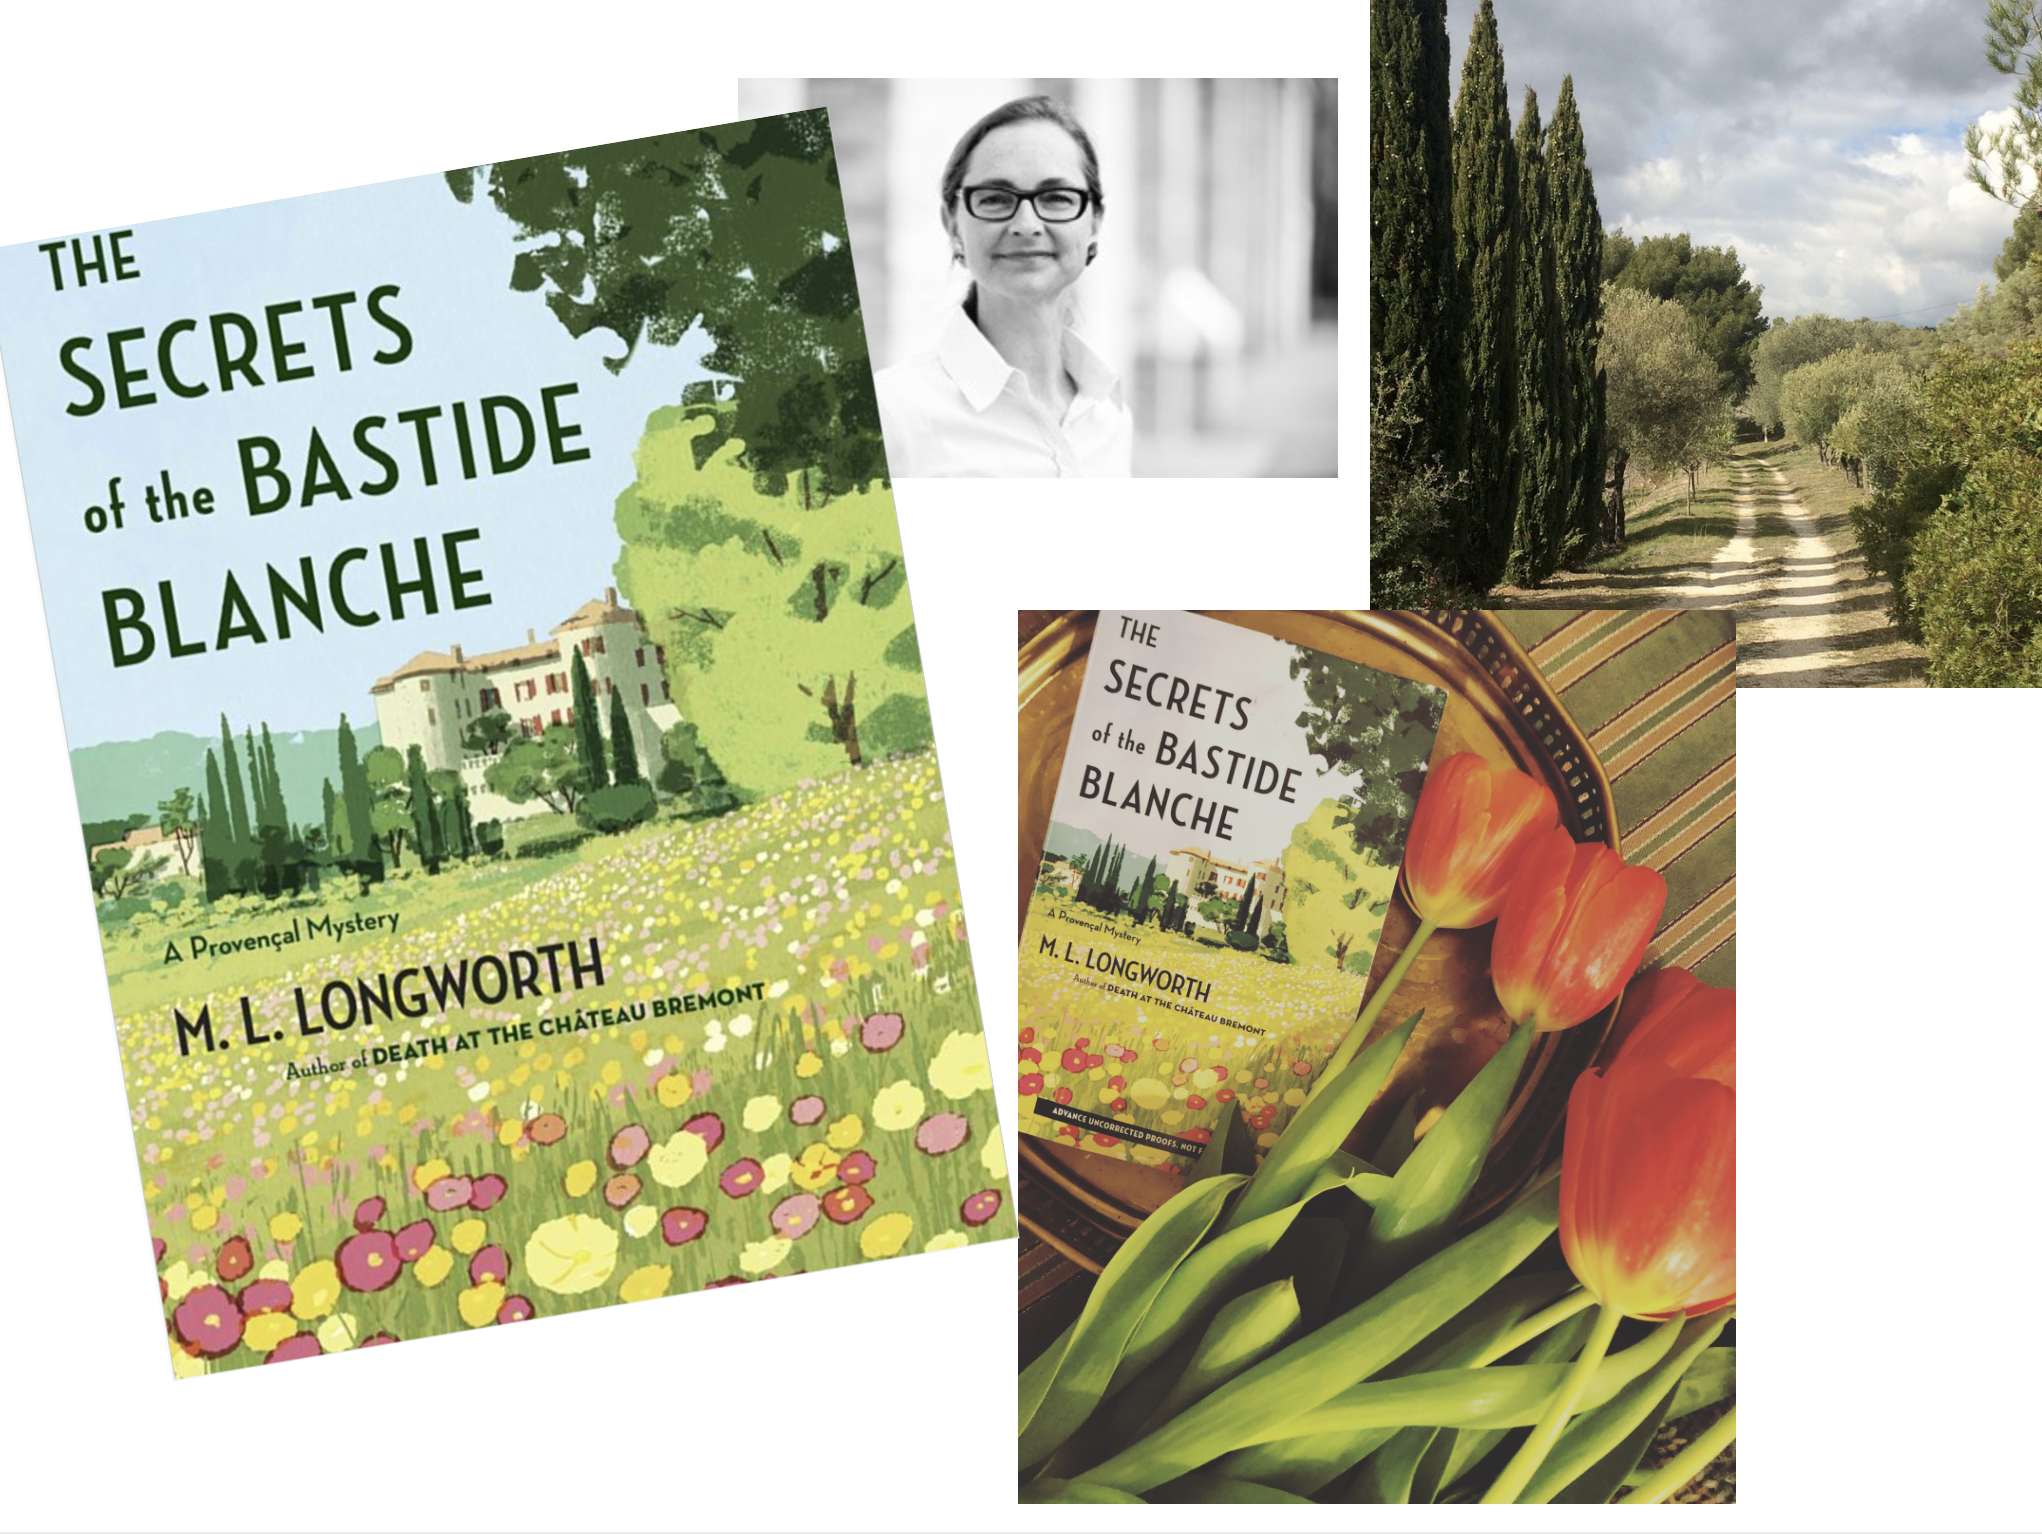 203: M.L. Longworth’s New Provençal Mystery and Life in Provence